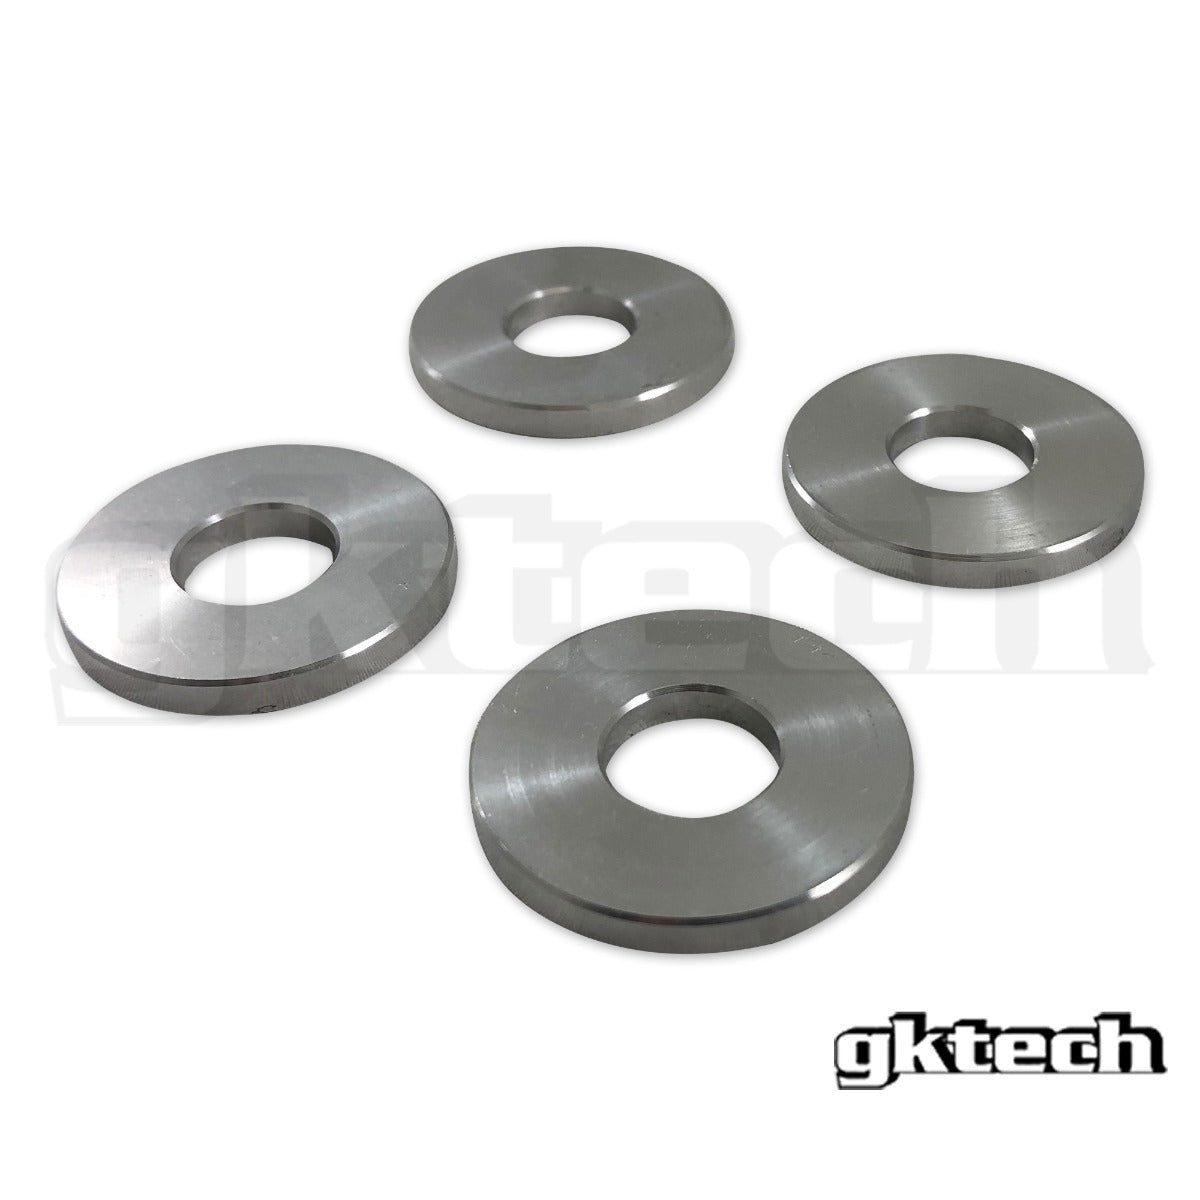 S13/180sx knuckle washers